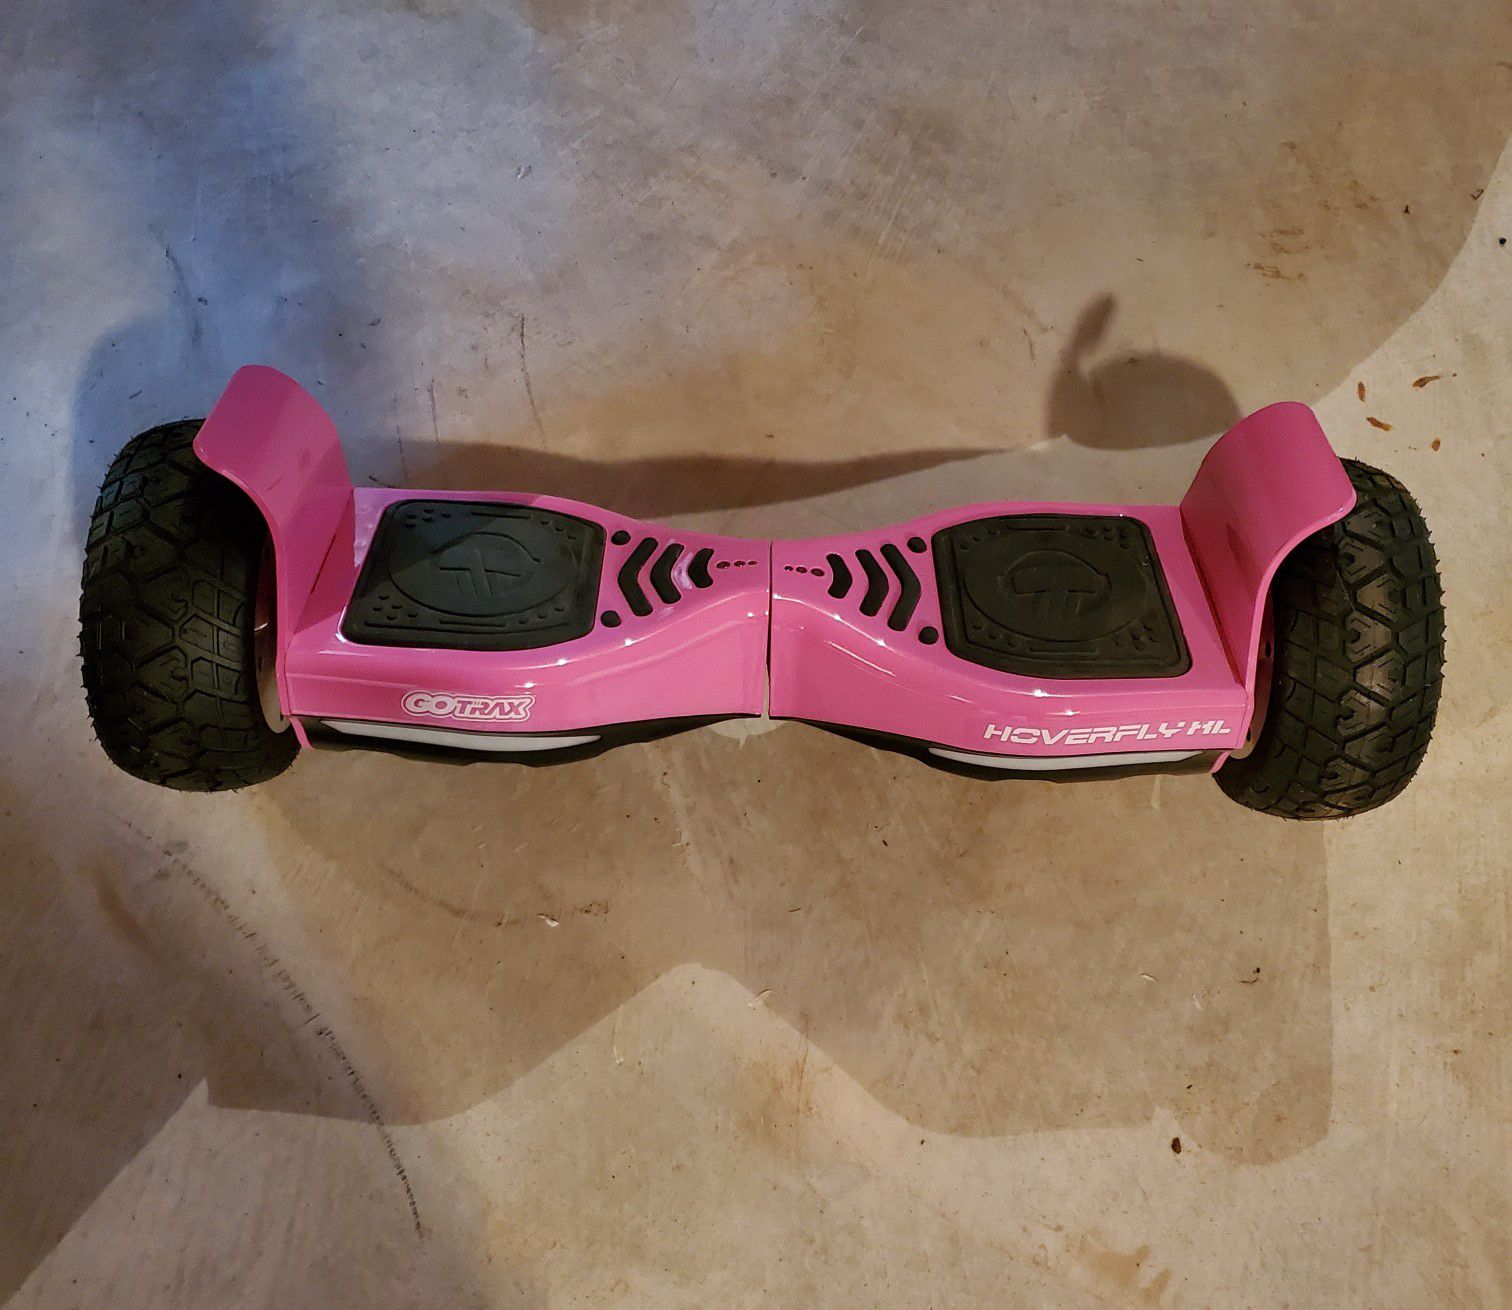 Go-trax XL Hoverboard